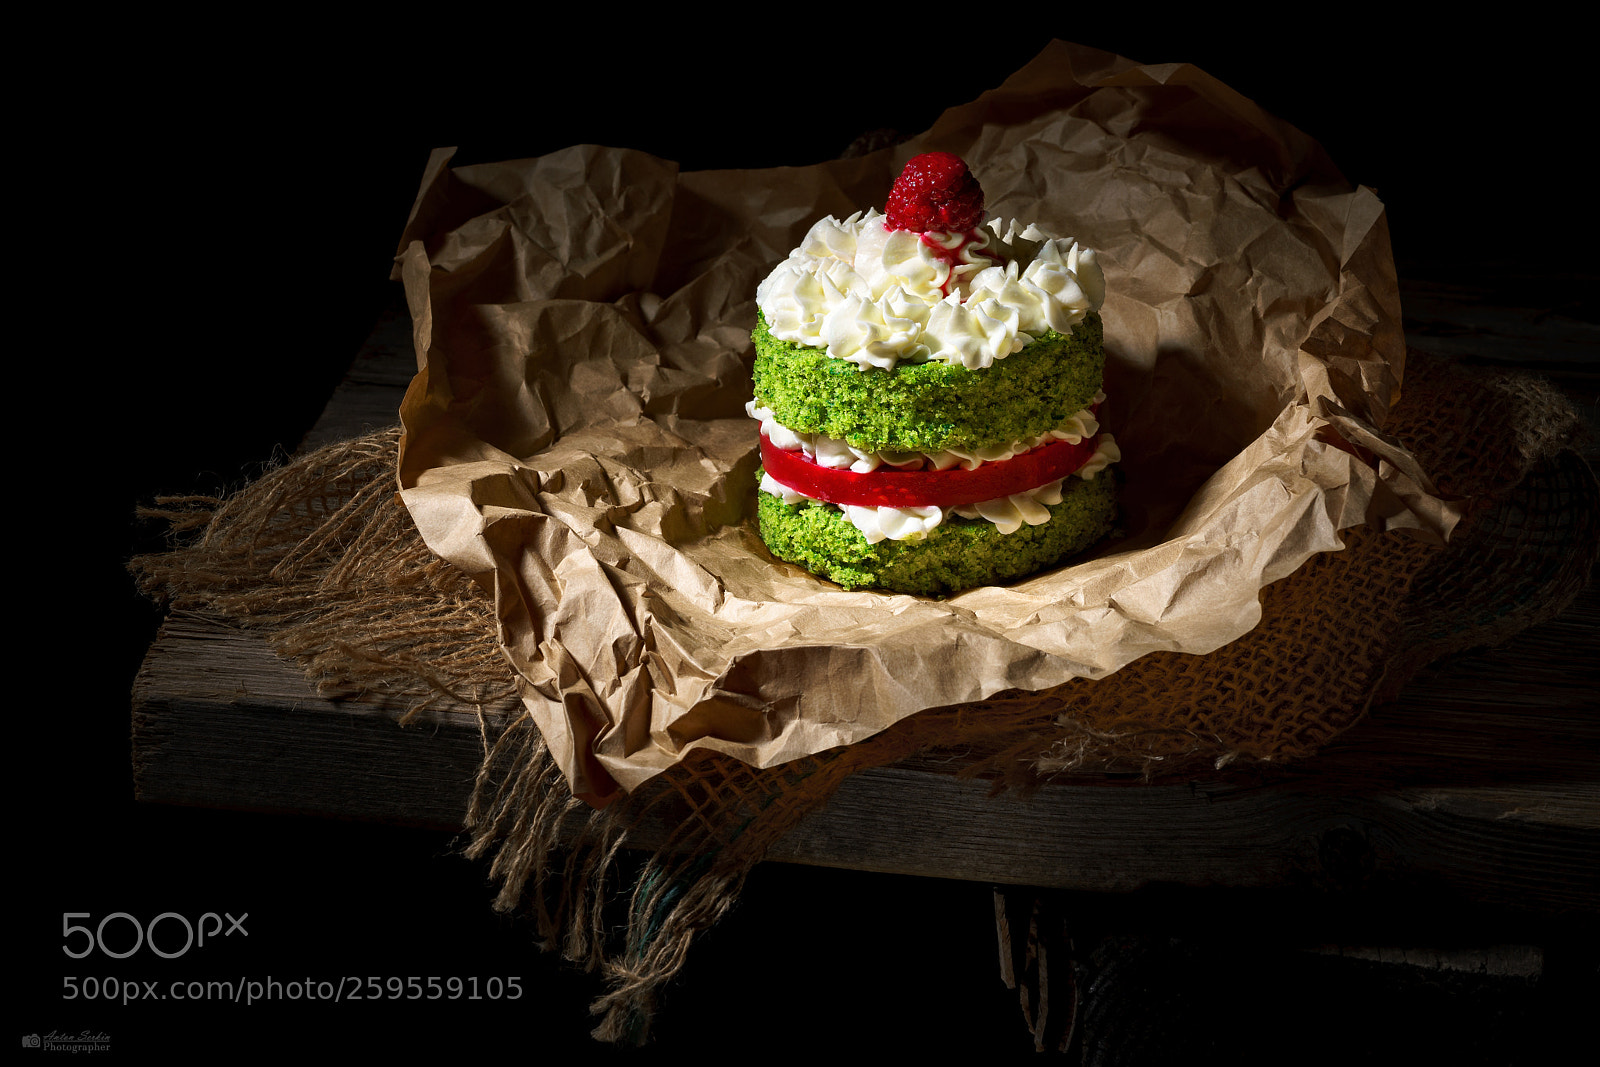 Sony a7R II sample photo. Spinach and raspberry cake photography